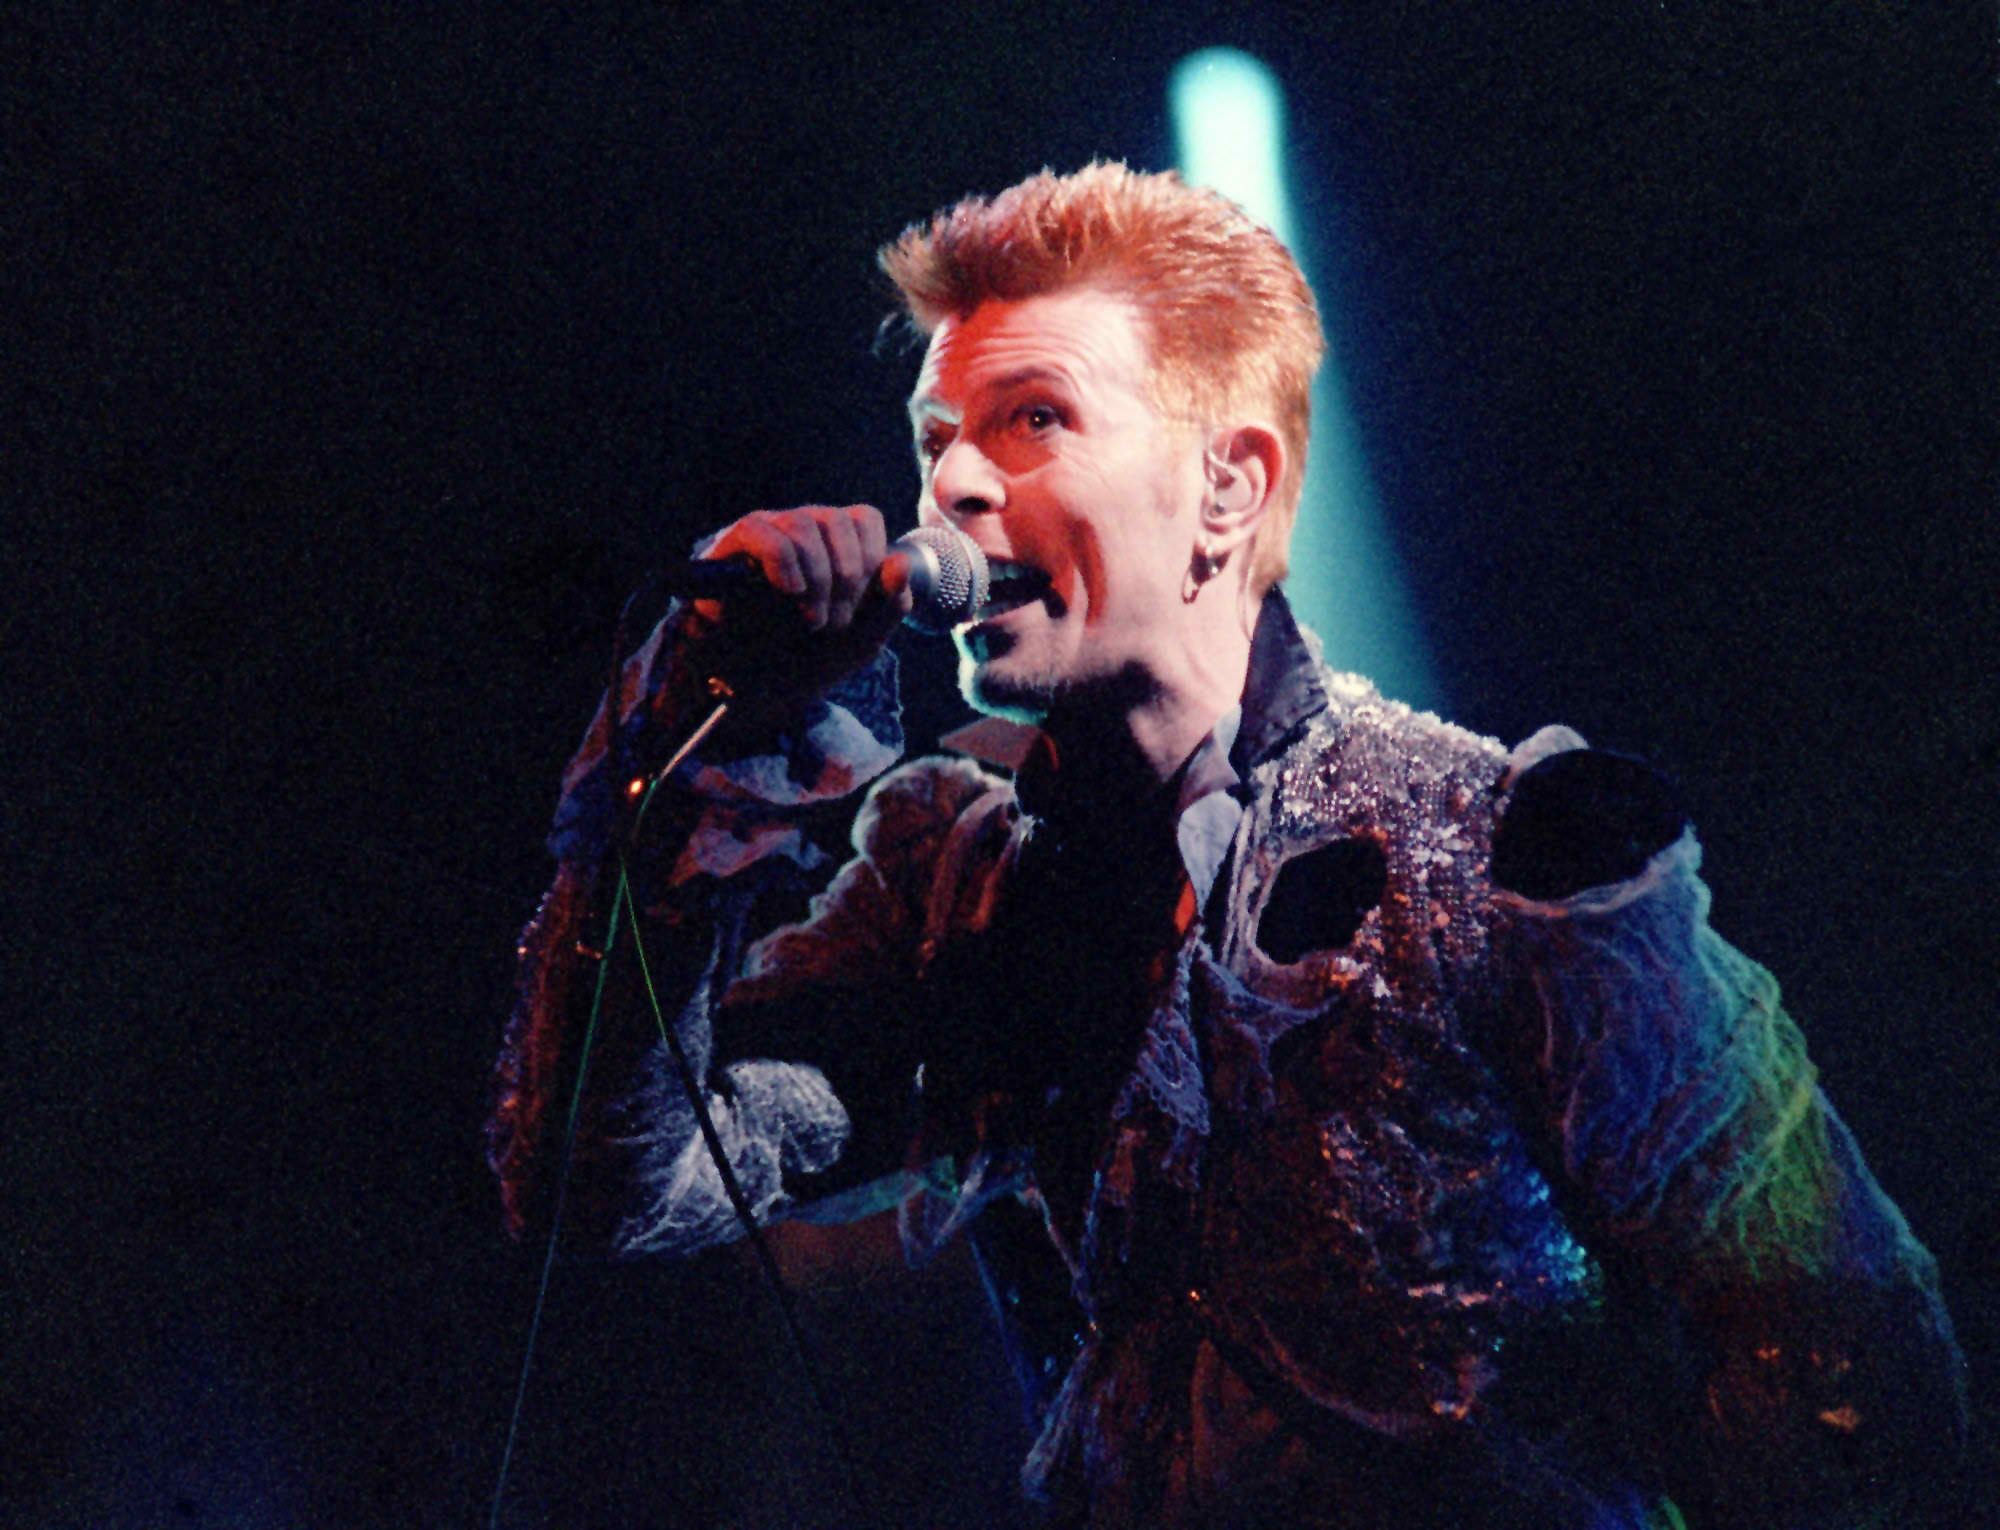 David Bowie nominated with Radiohead, Anohni for Mercury Prize